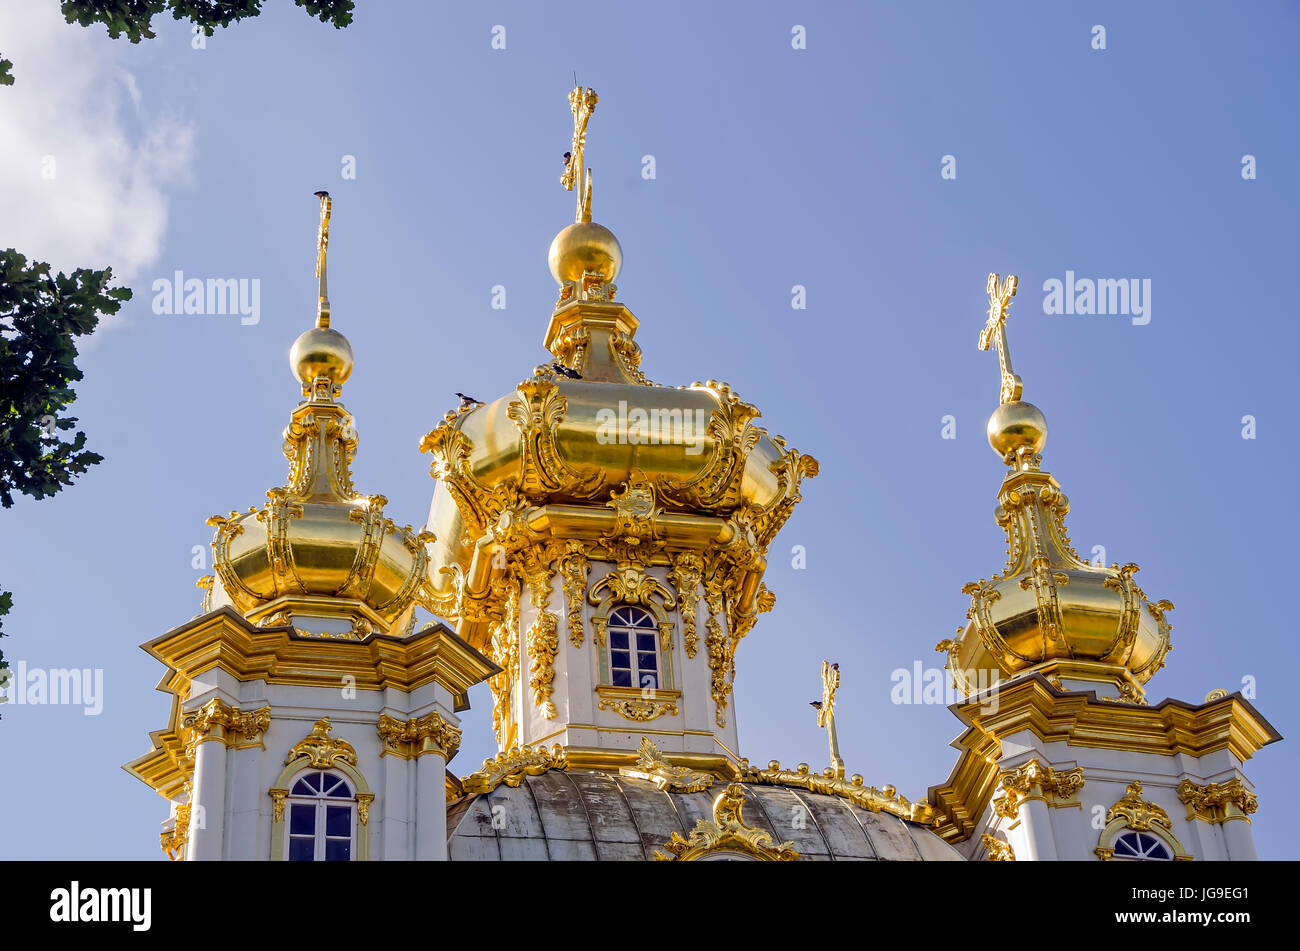 Peterhof Palace gilded  domes of Peter and Paul Cathedral at the Grand Palace near Saint Petersburg, Russia Stock Photo